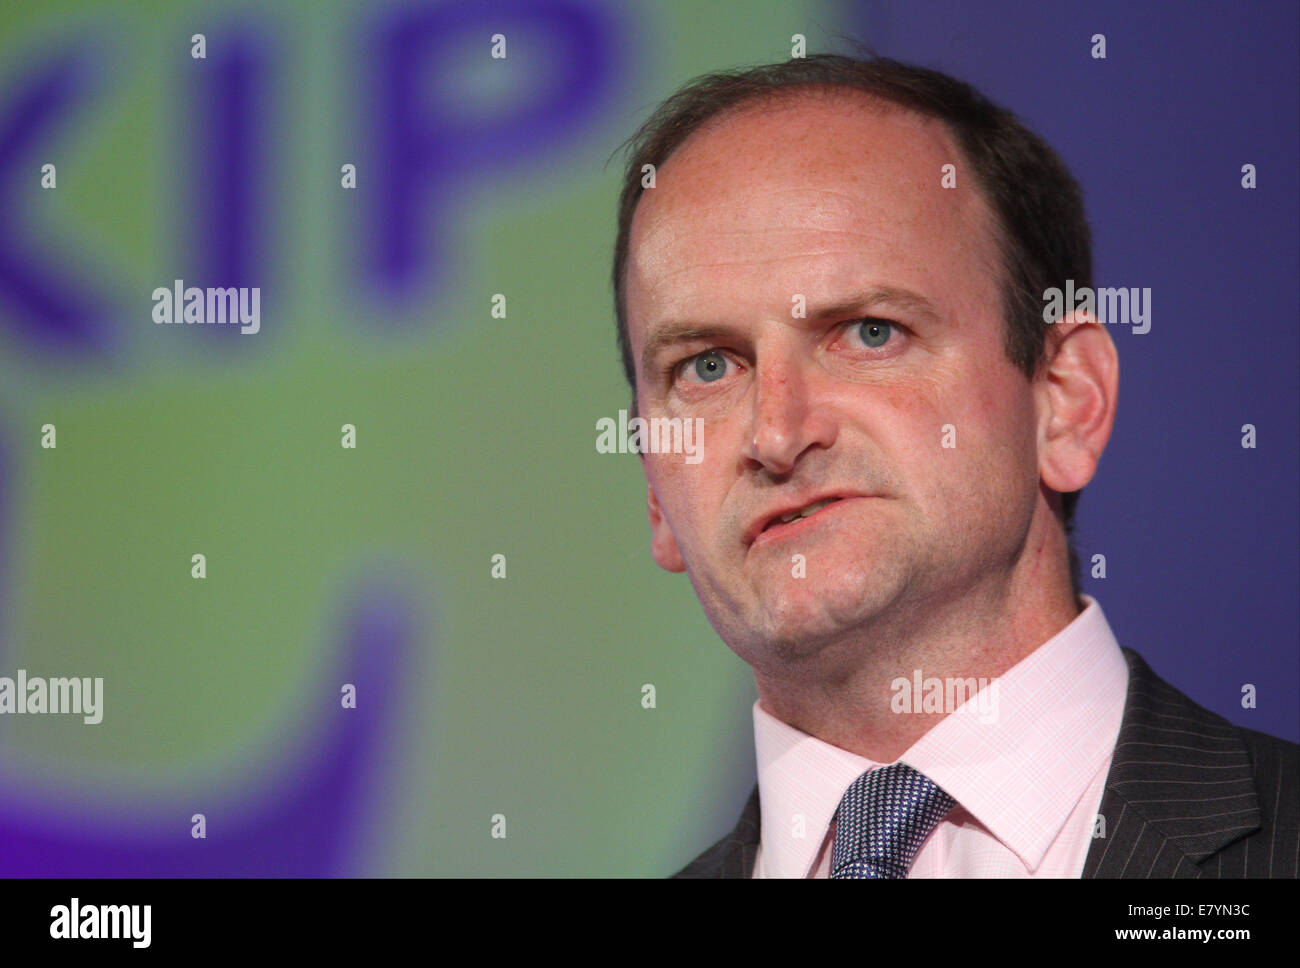 DOUGLAS CARSWELL UK INDEPENDENCE PARTY 26 September 2014 DONCASTER RACECOURSE DONCASTER YORKSHIRE ENGLAND Stock Photo